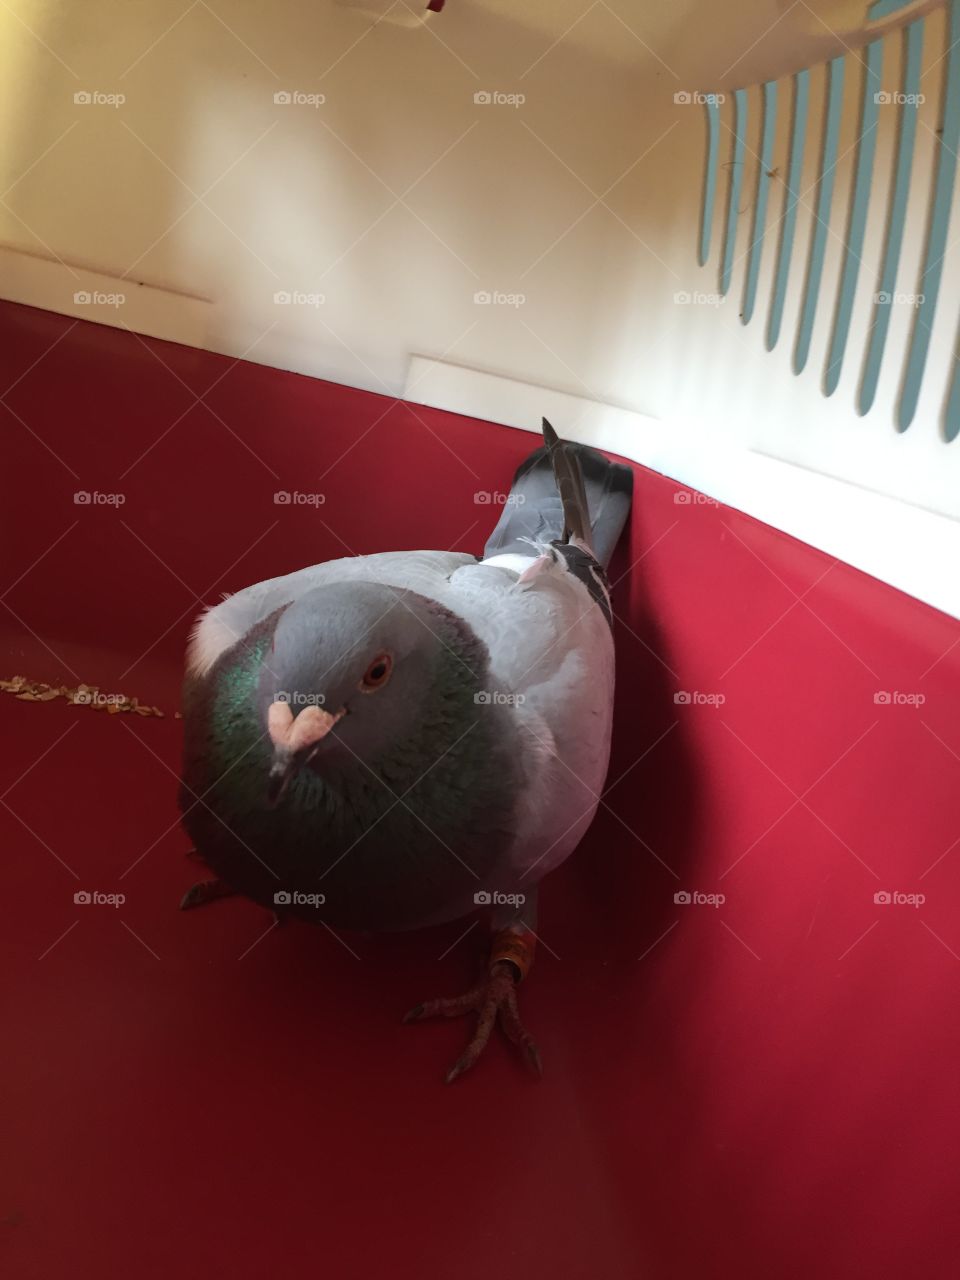 Pete the Pigeon